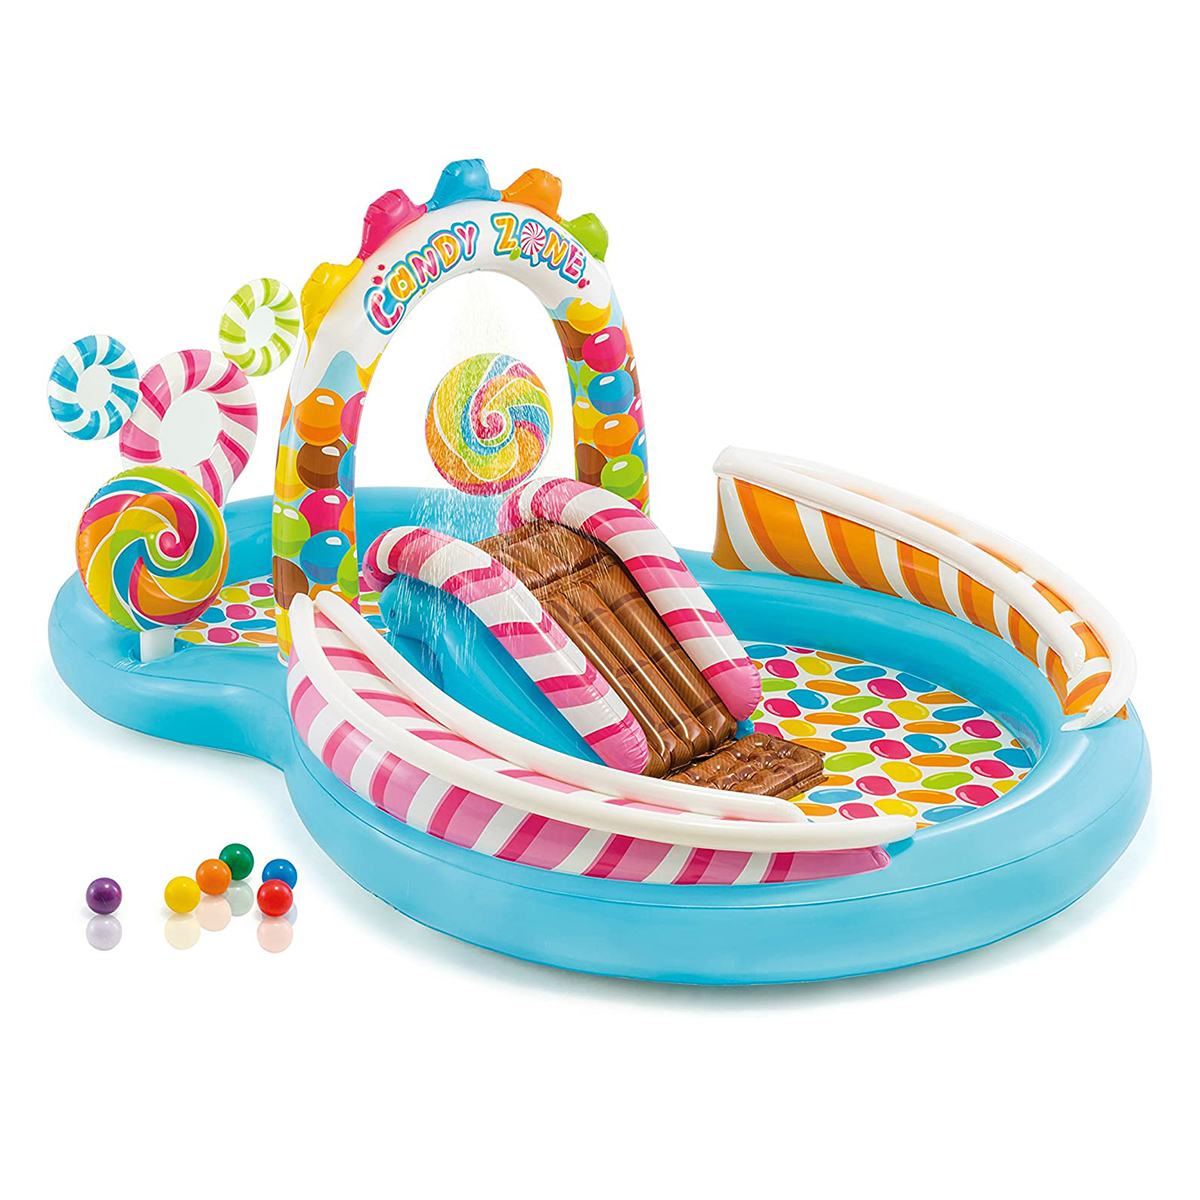 Intex Candy Zone Water Play Center